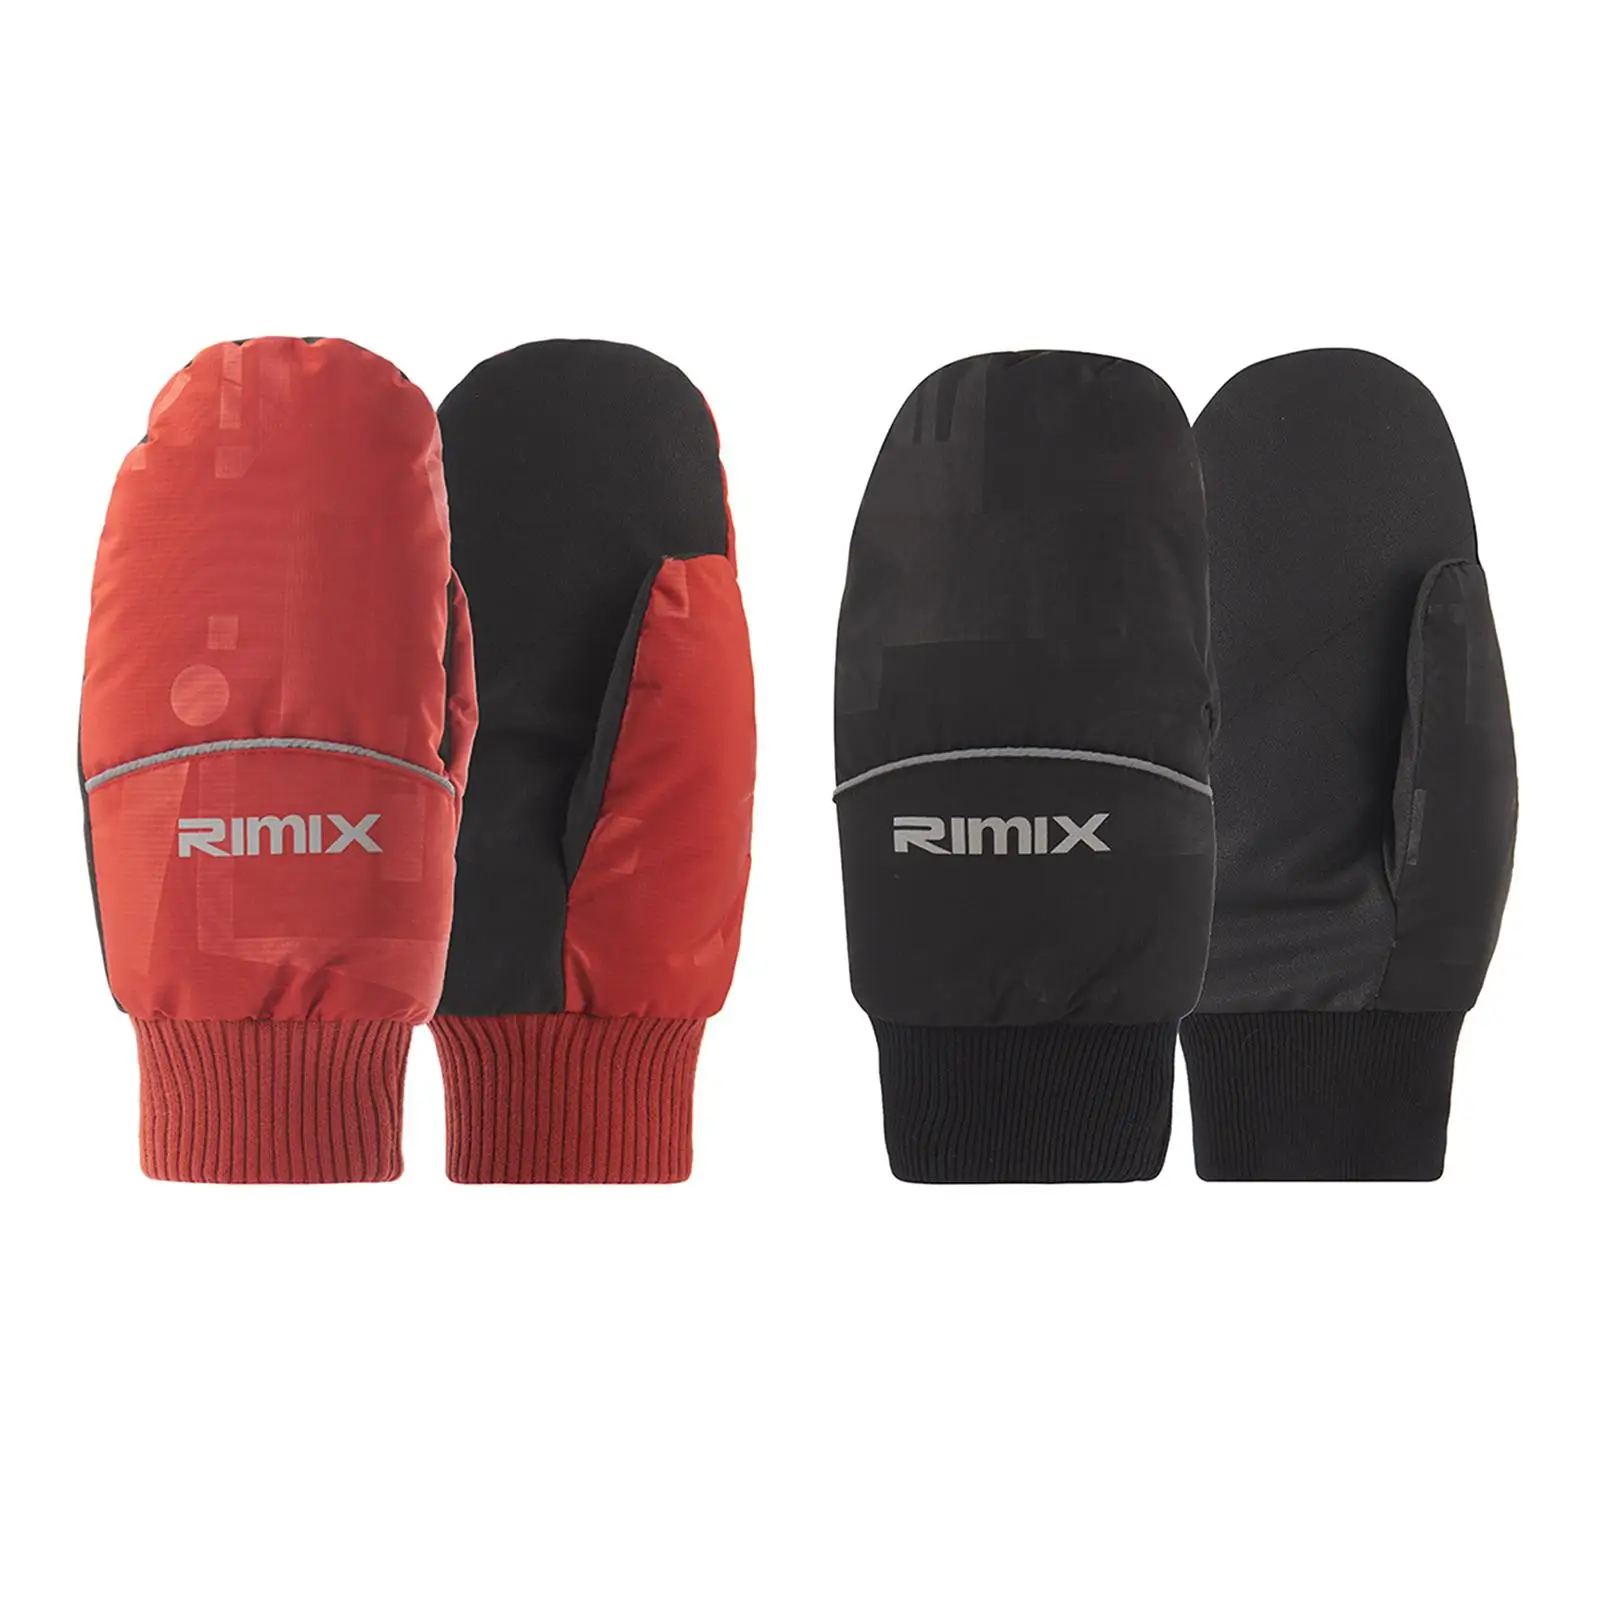 Running Glove - Thermal Winter Gloves for - Lightweight Cold Weather